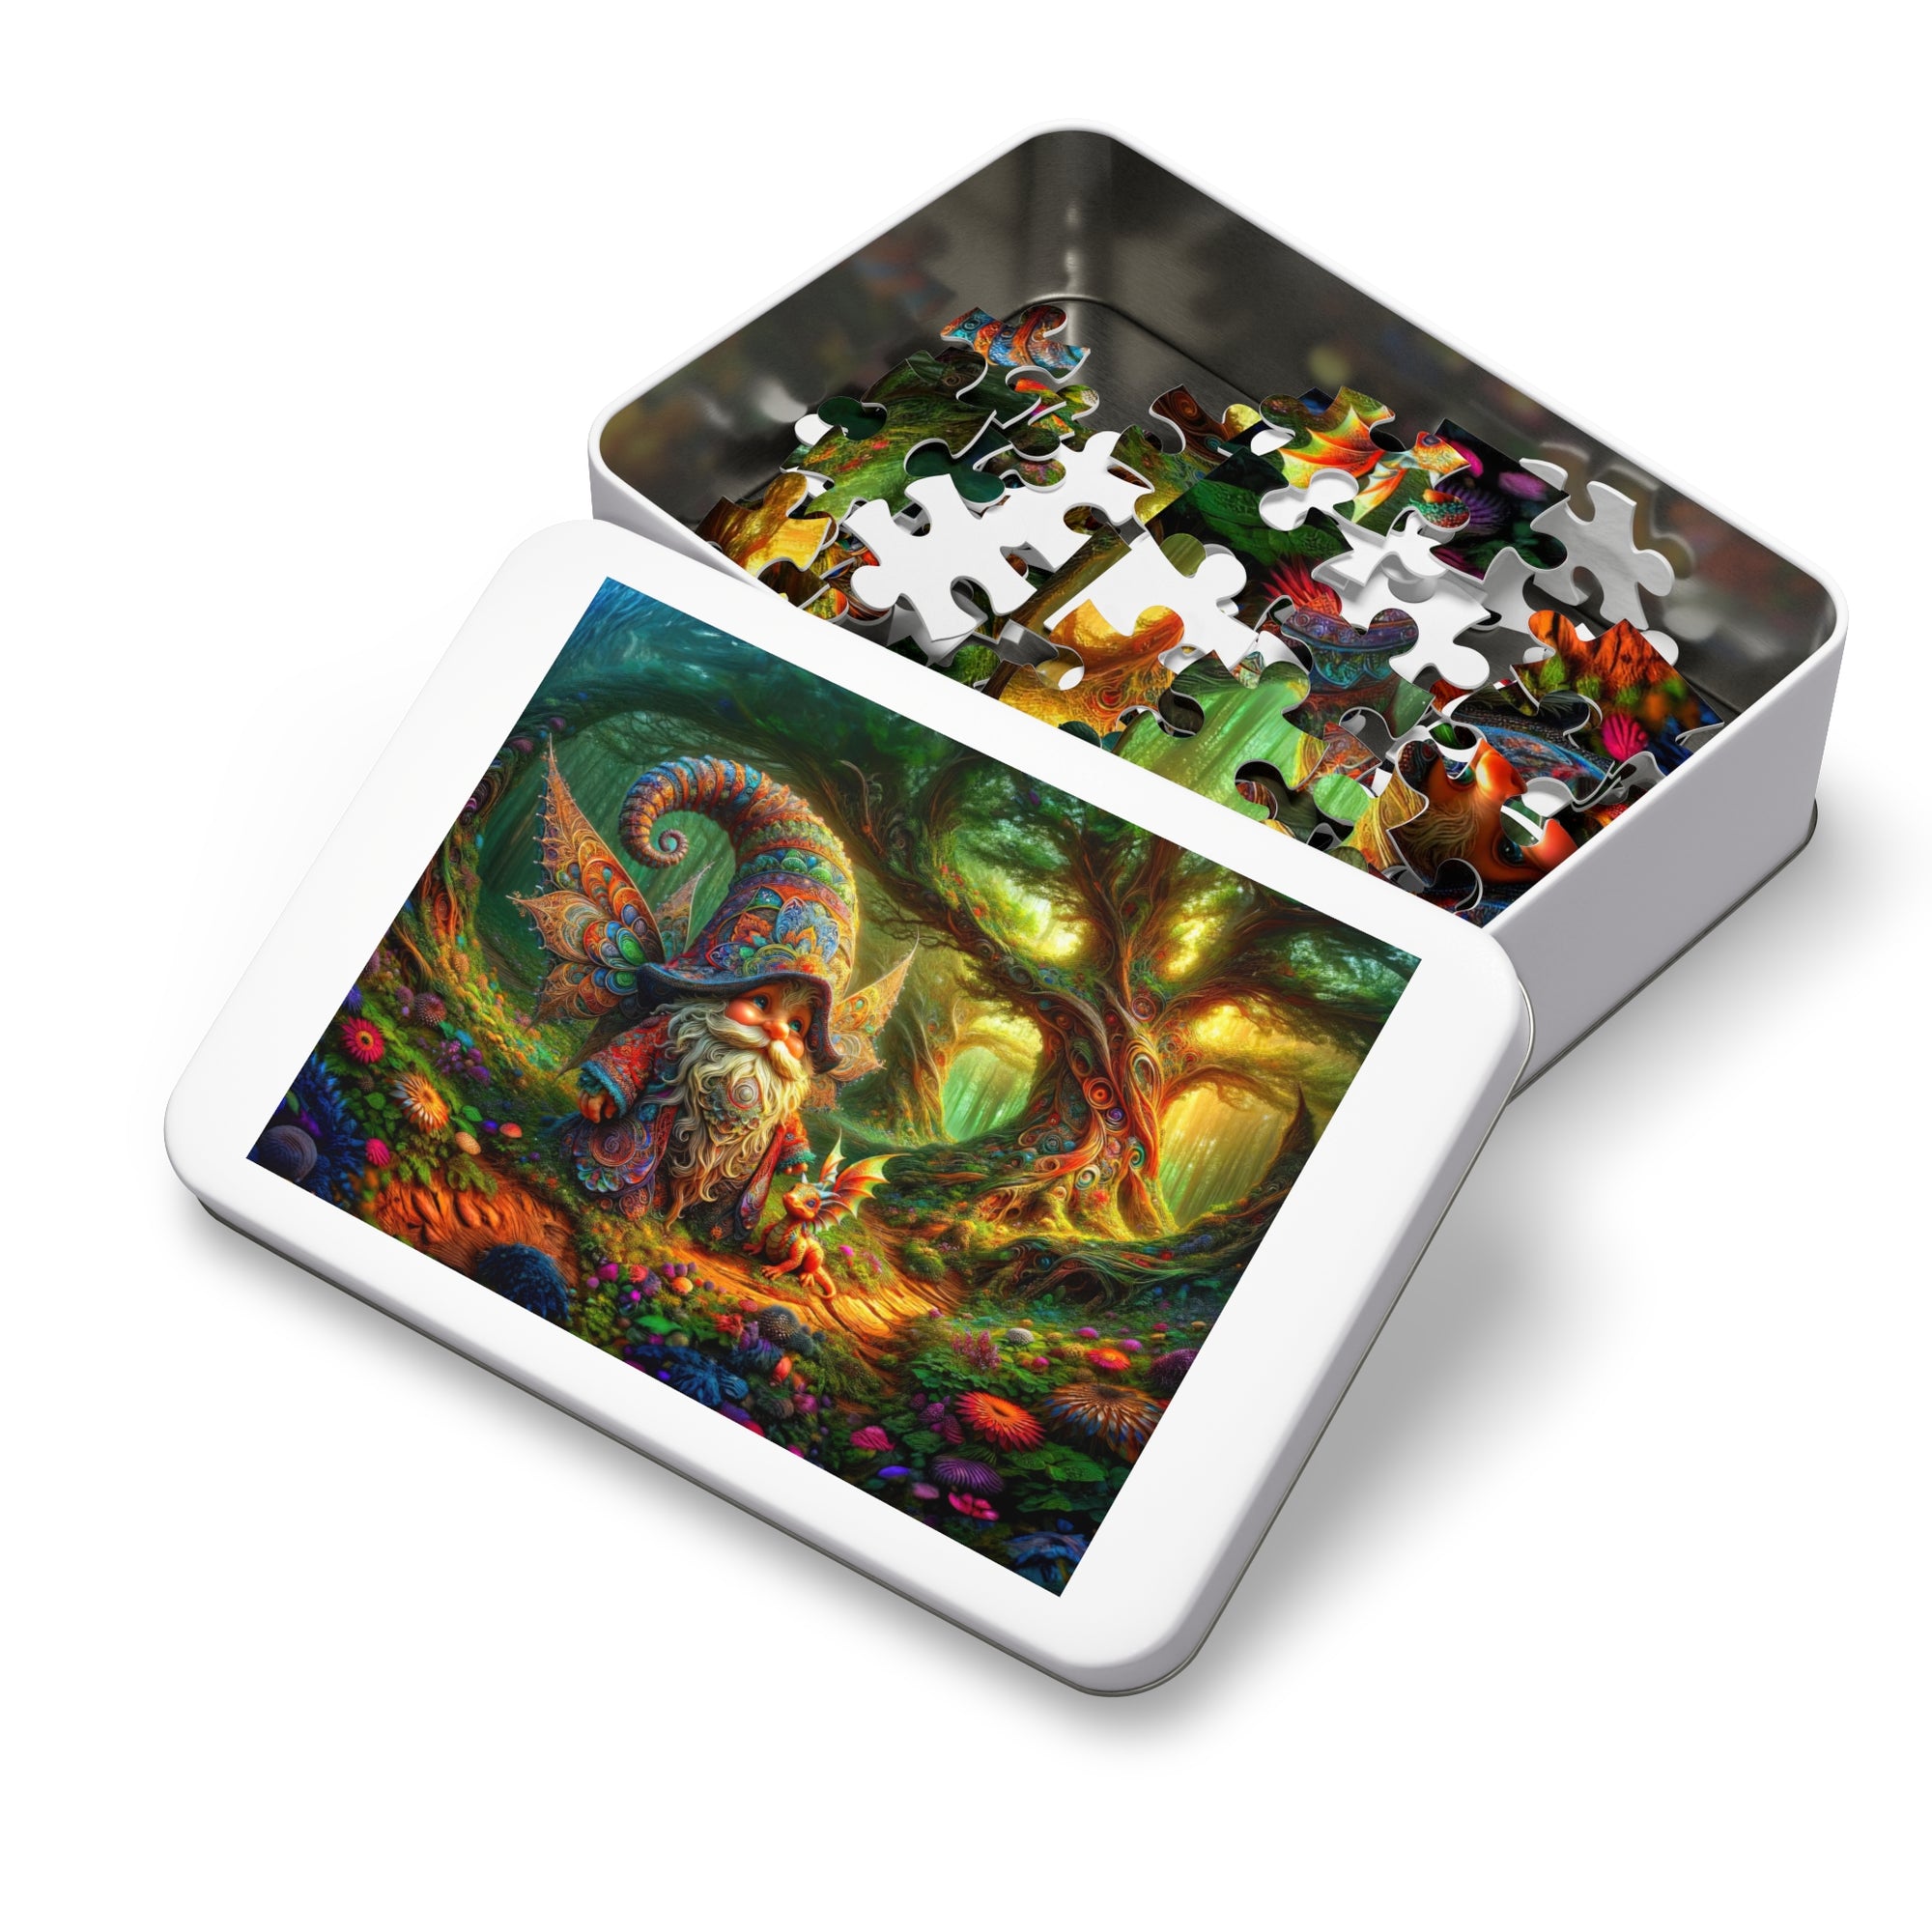 The Gnome's Enchanted Rendezvous Jigsaw Puzzle